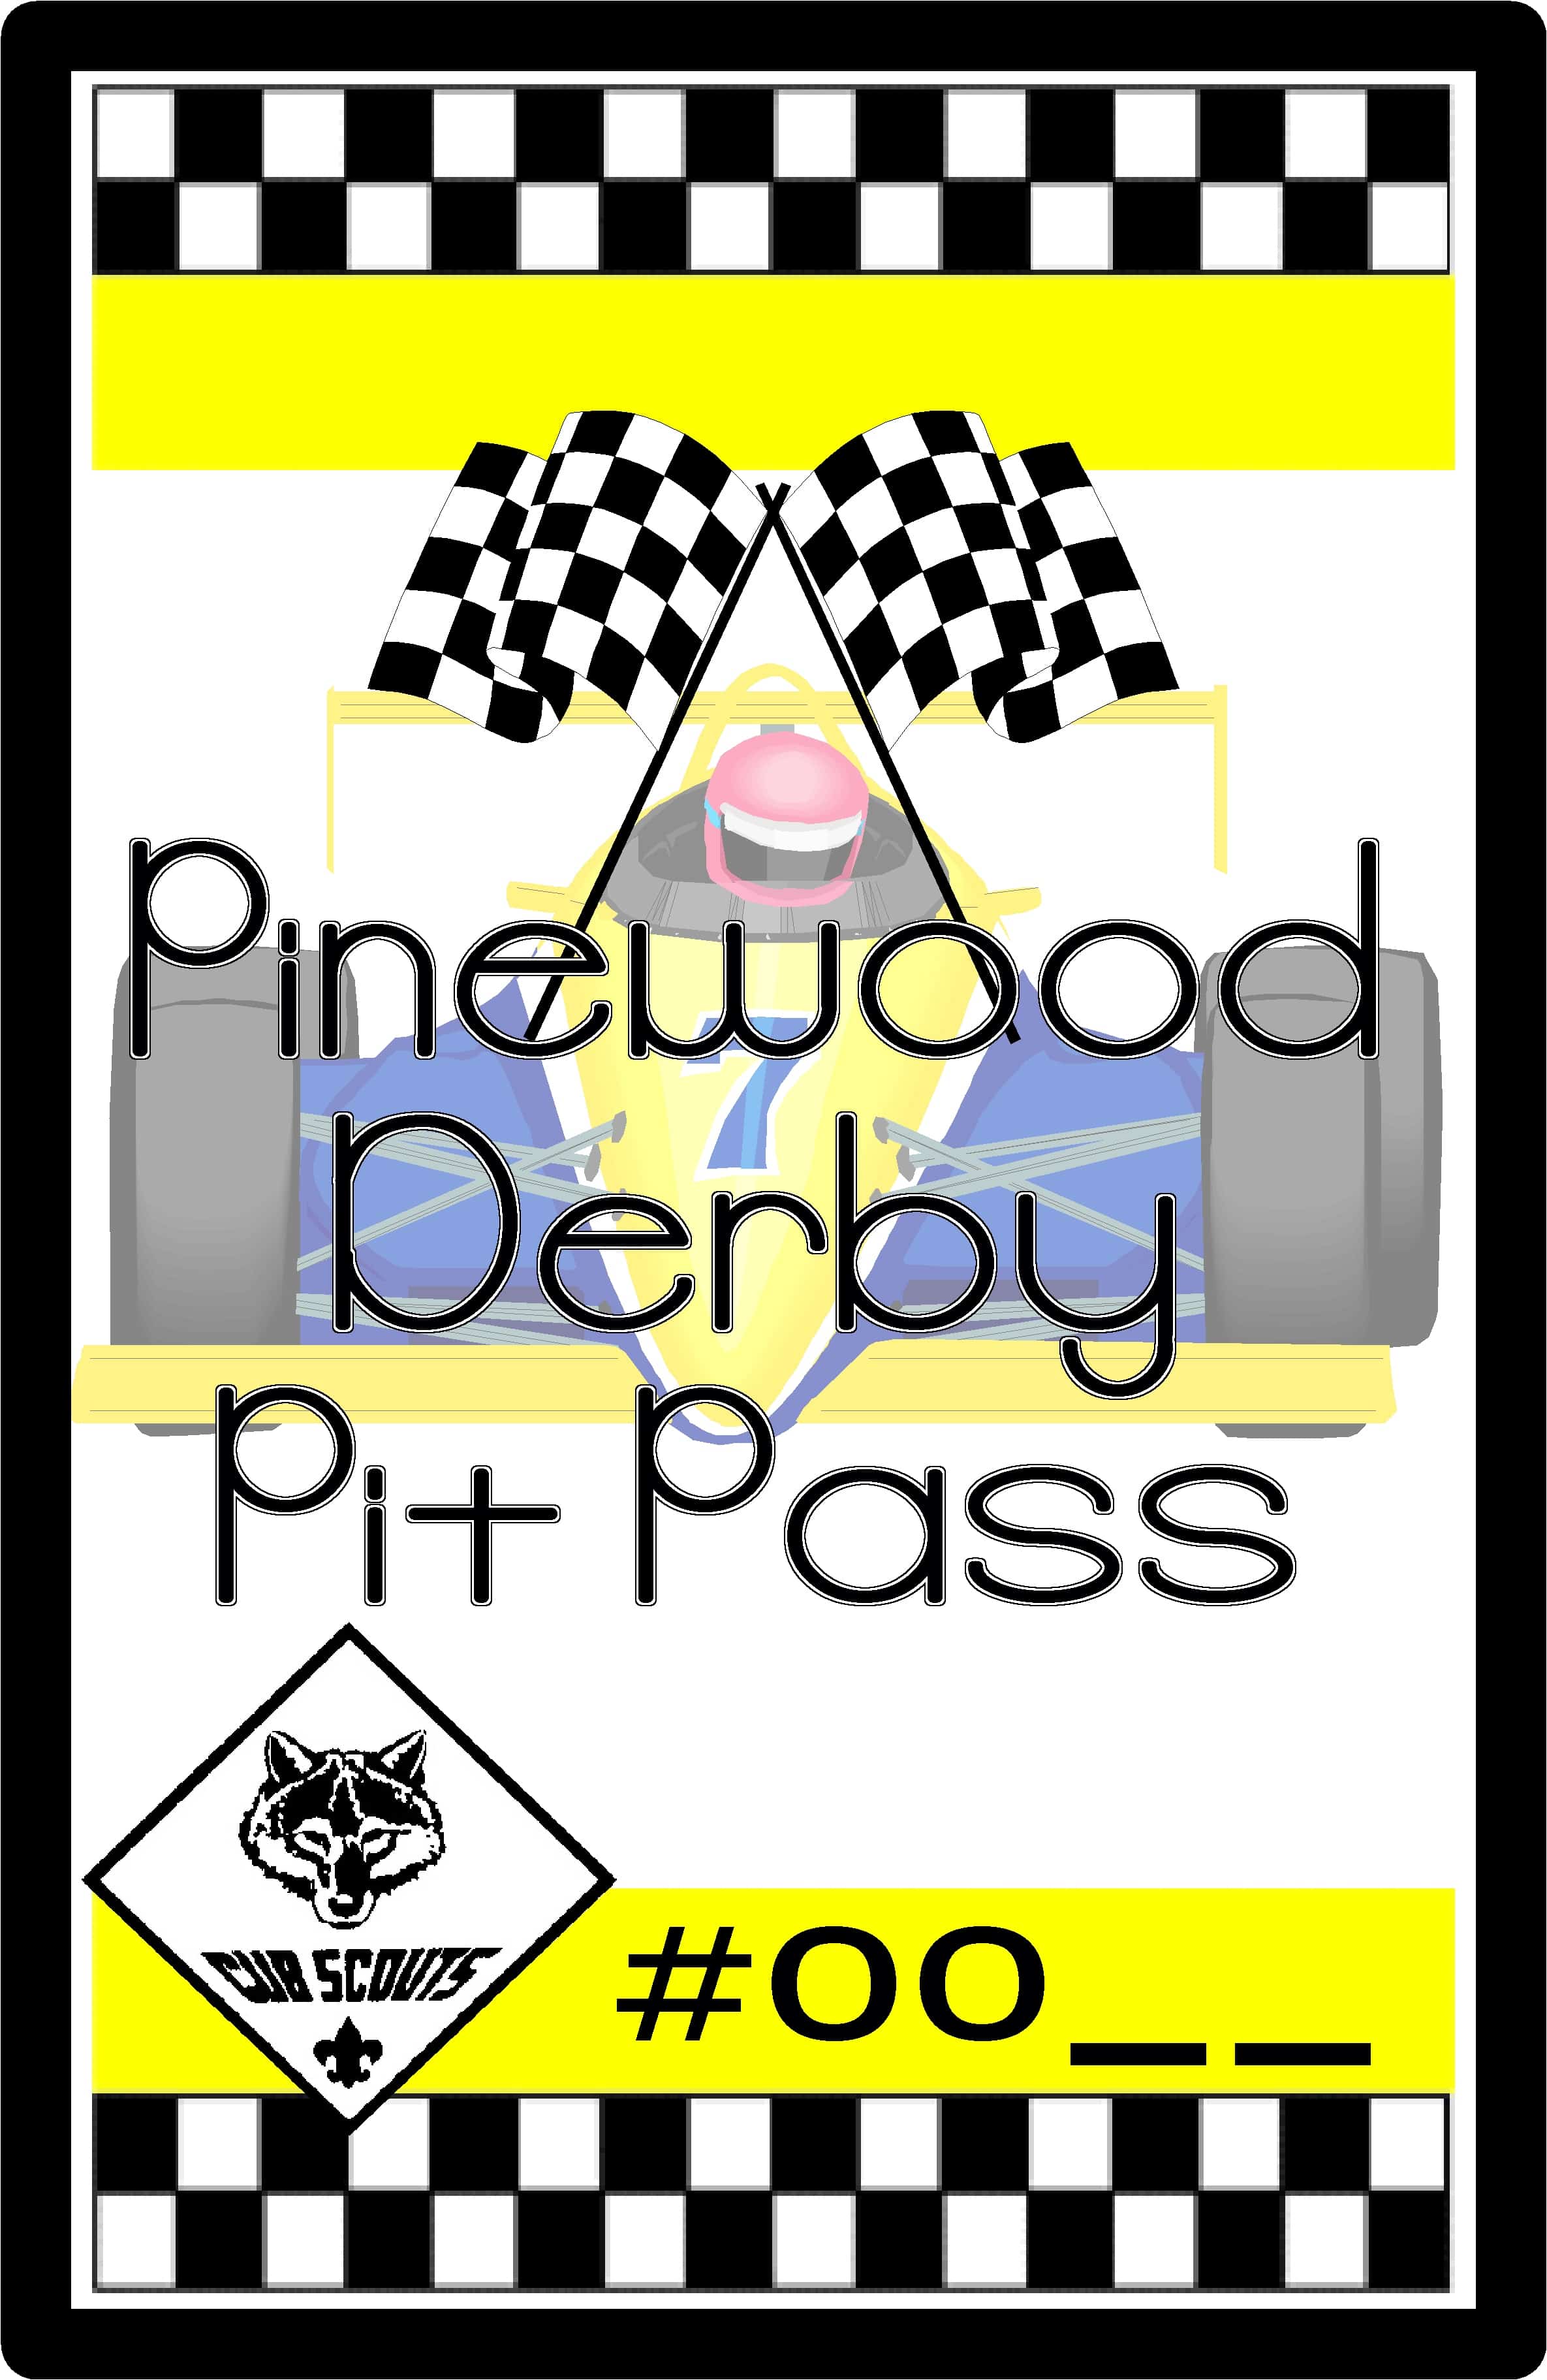 cub scout pinewood derby pit pass